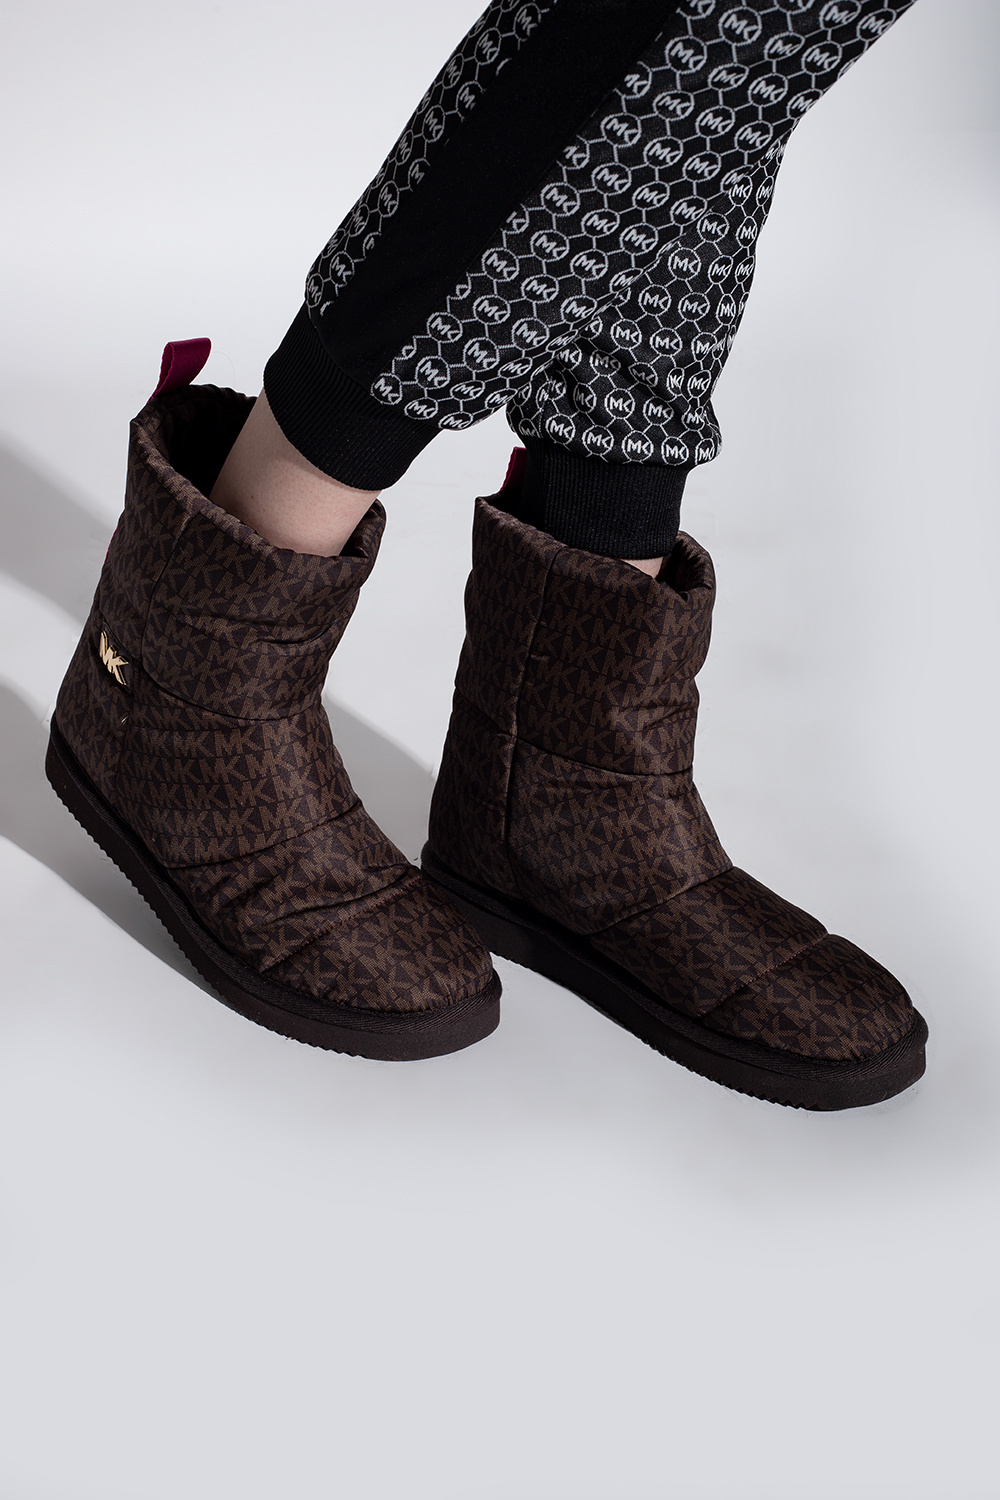 Shop Michael Kors Mens Boots  UP TO 52 OFF